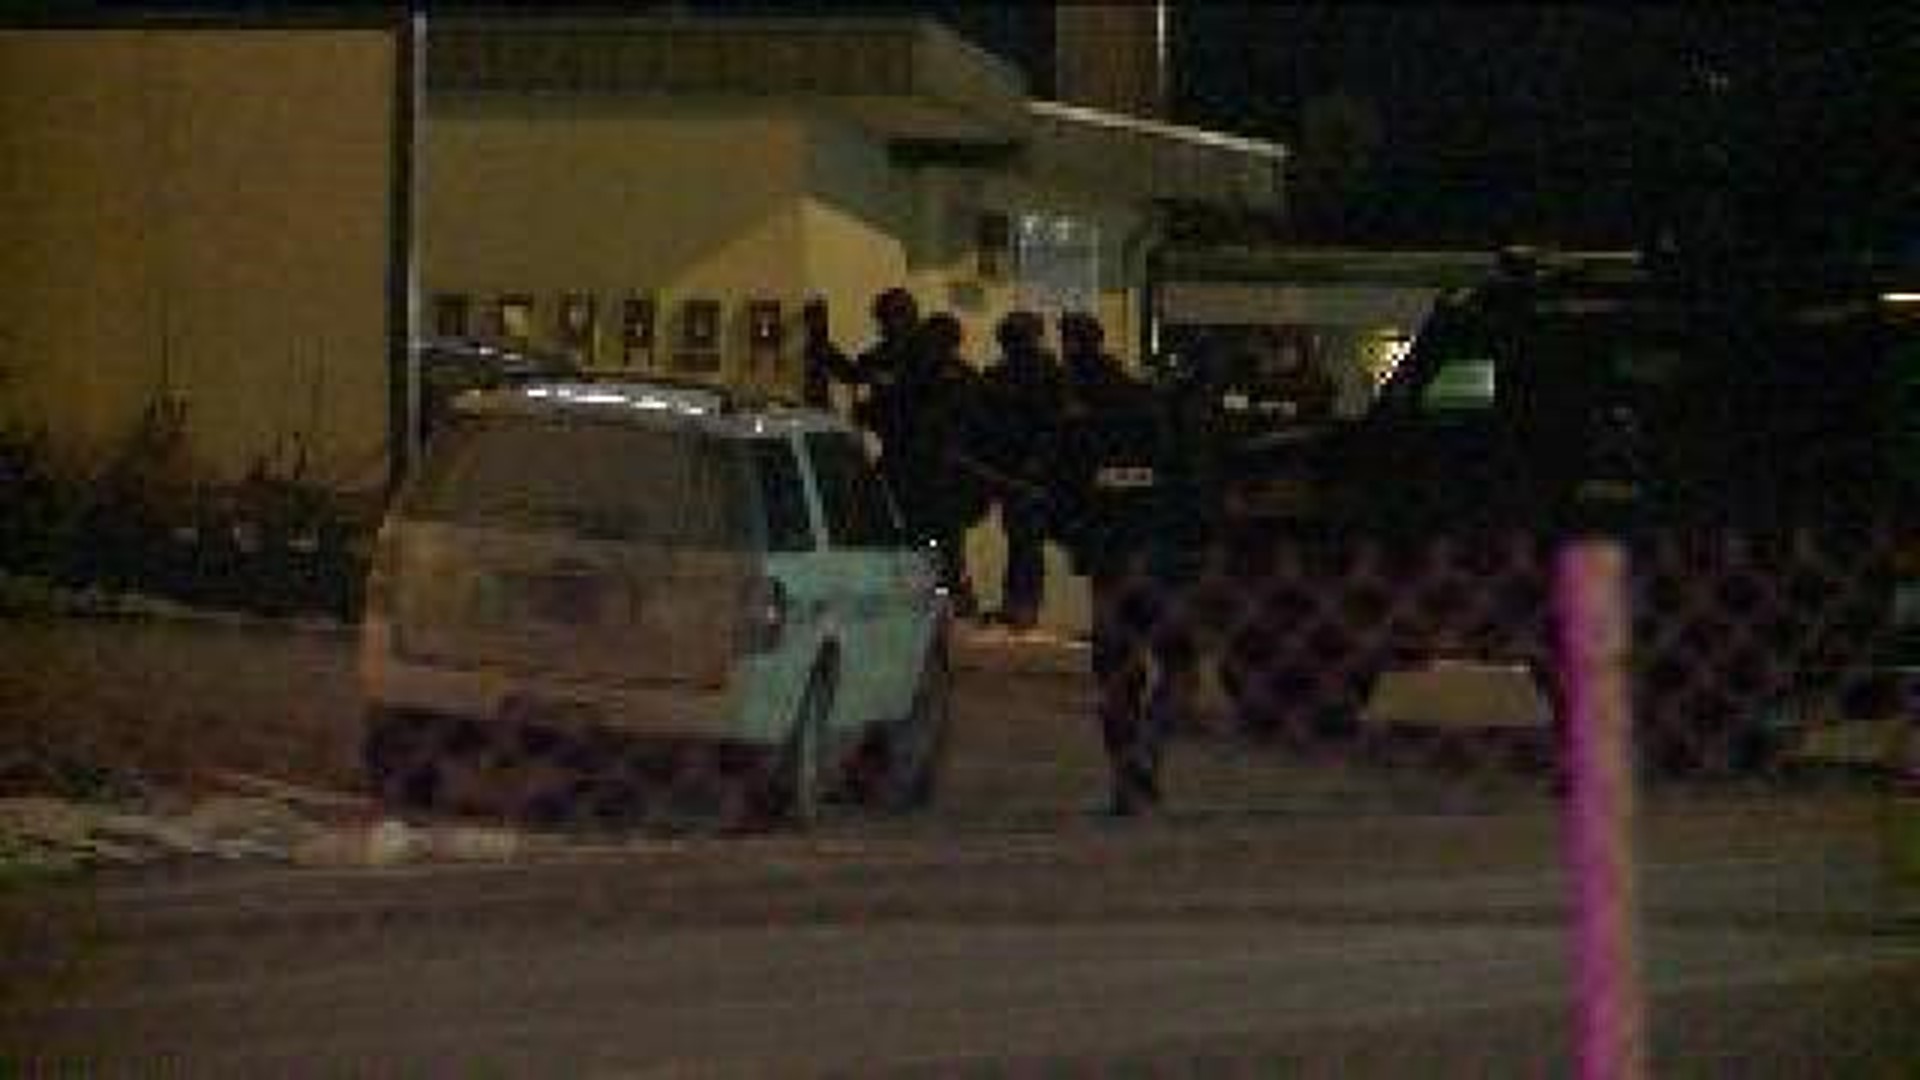 Police: Man Shot At Officers From Inside Motel